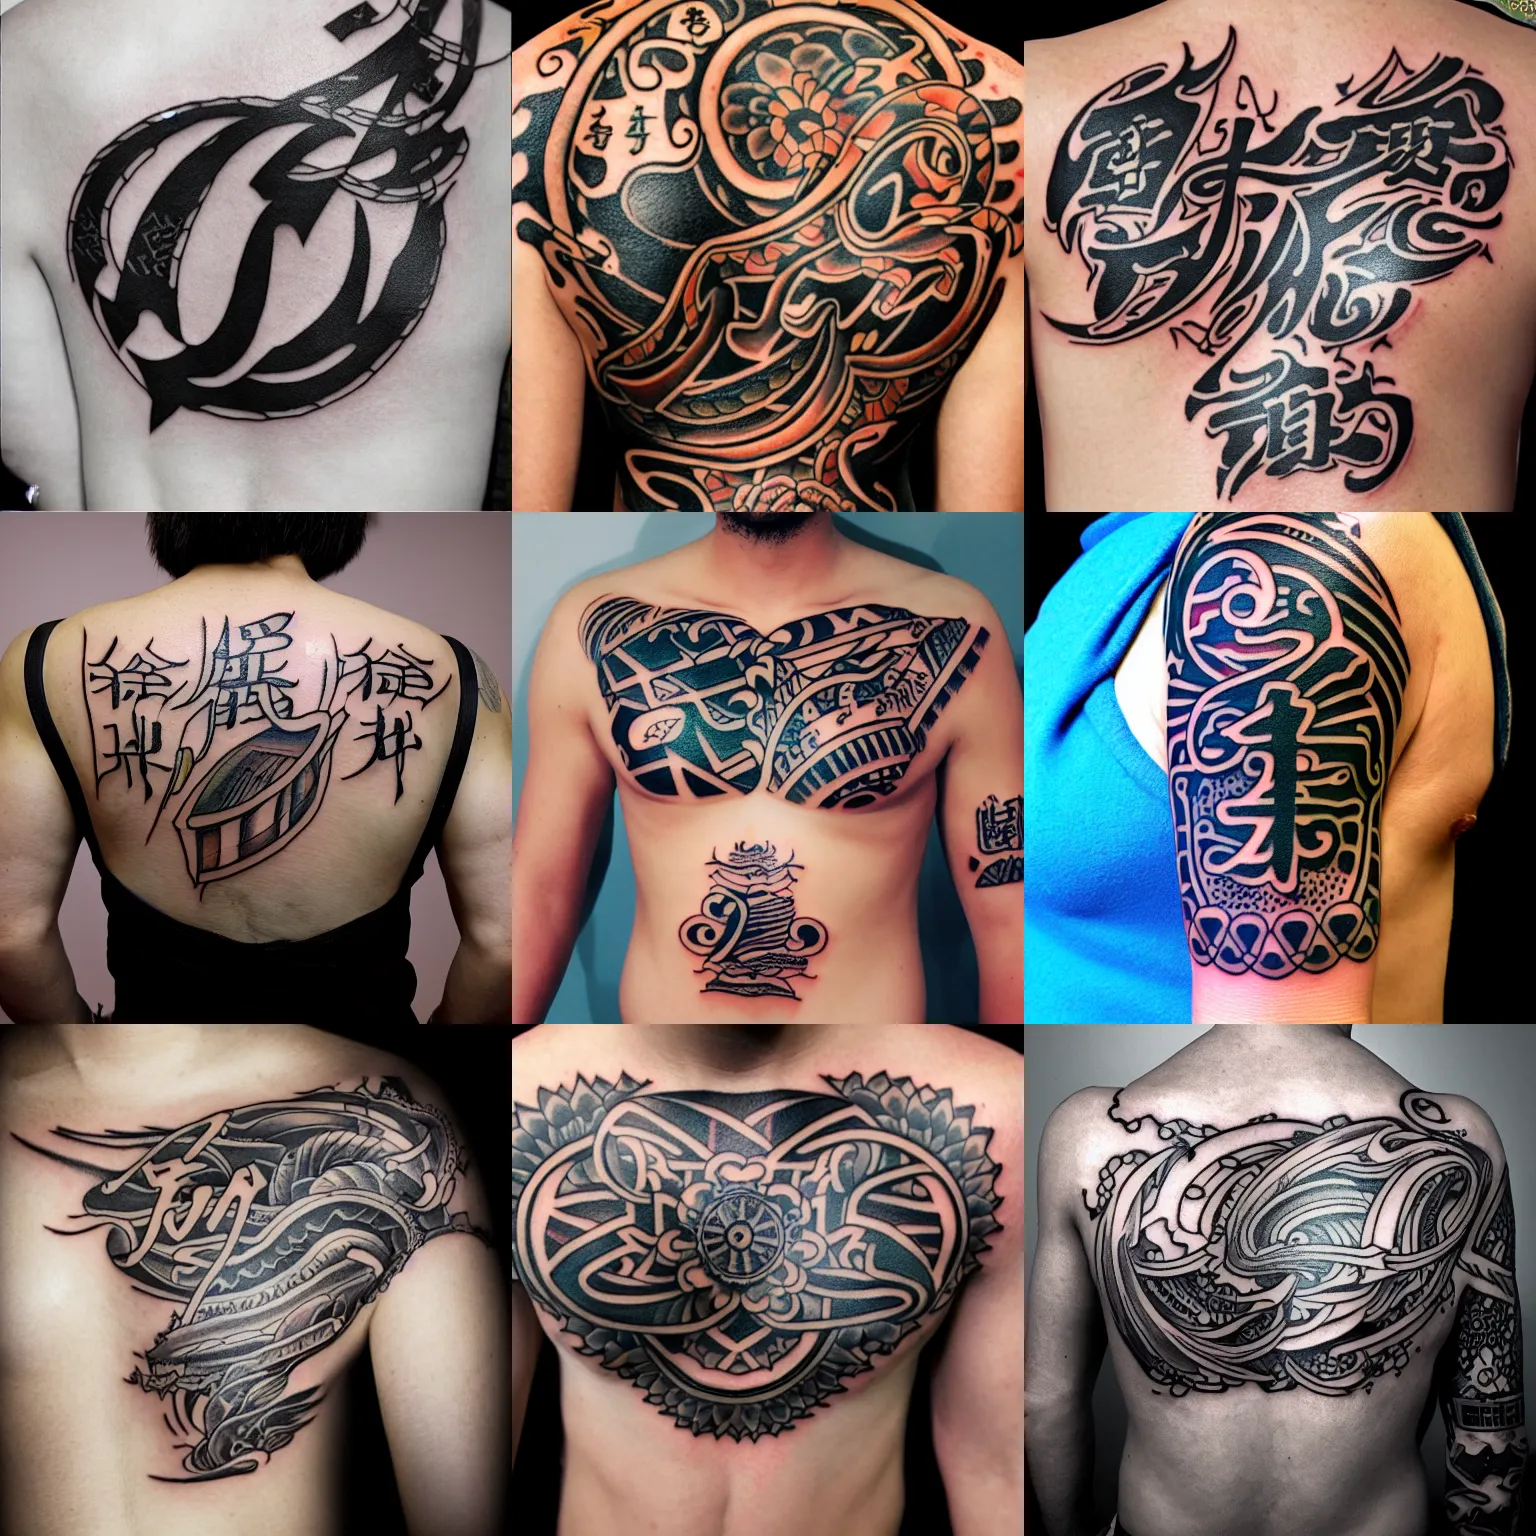 Tattoo inspiration 2017 - Ladi Dada - TattooViral.com | Your Number One  source for daily Tattoo designs, Ideas & Inspiration